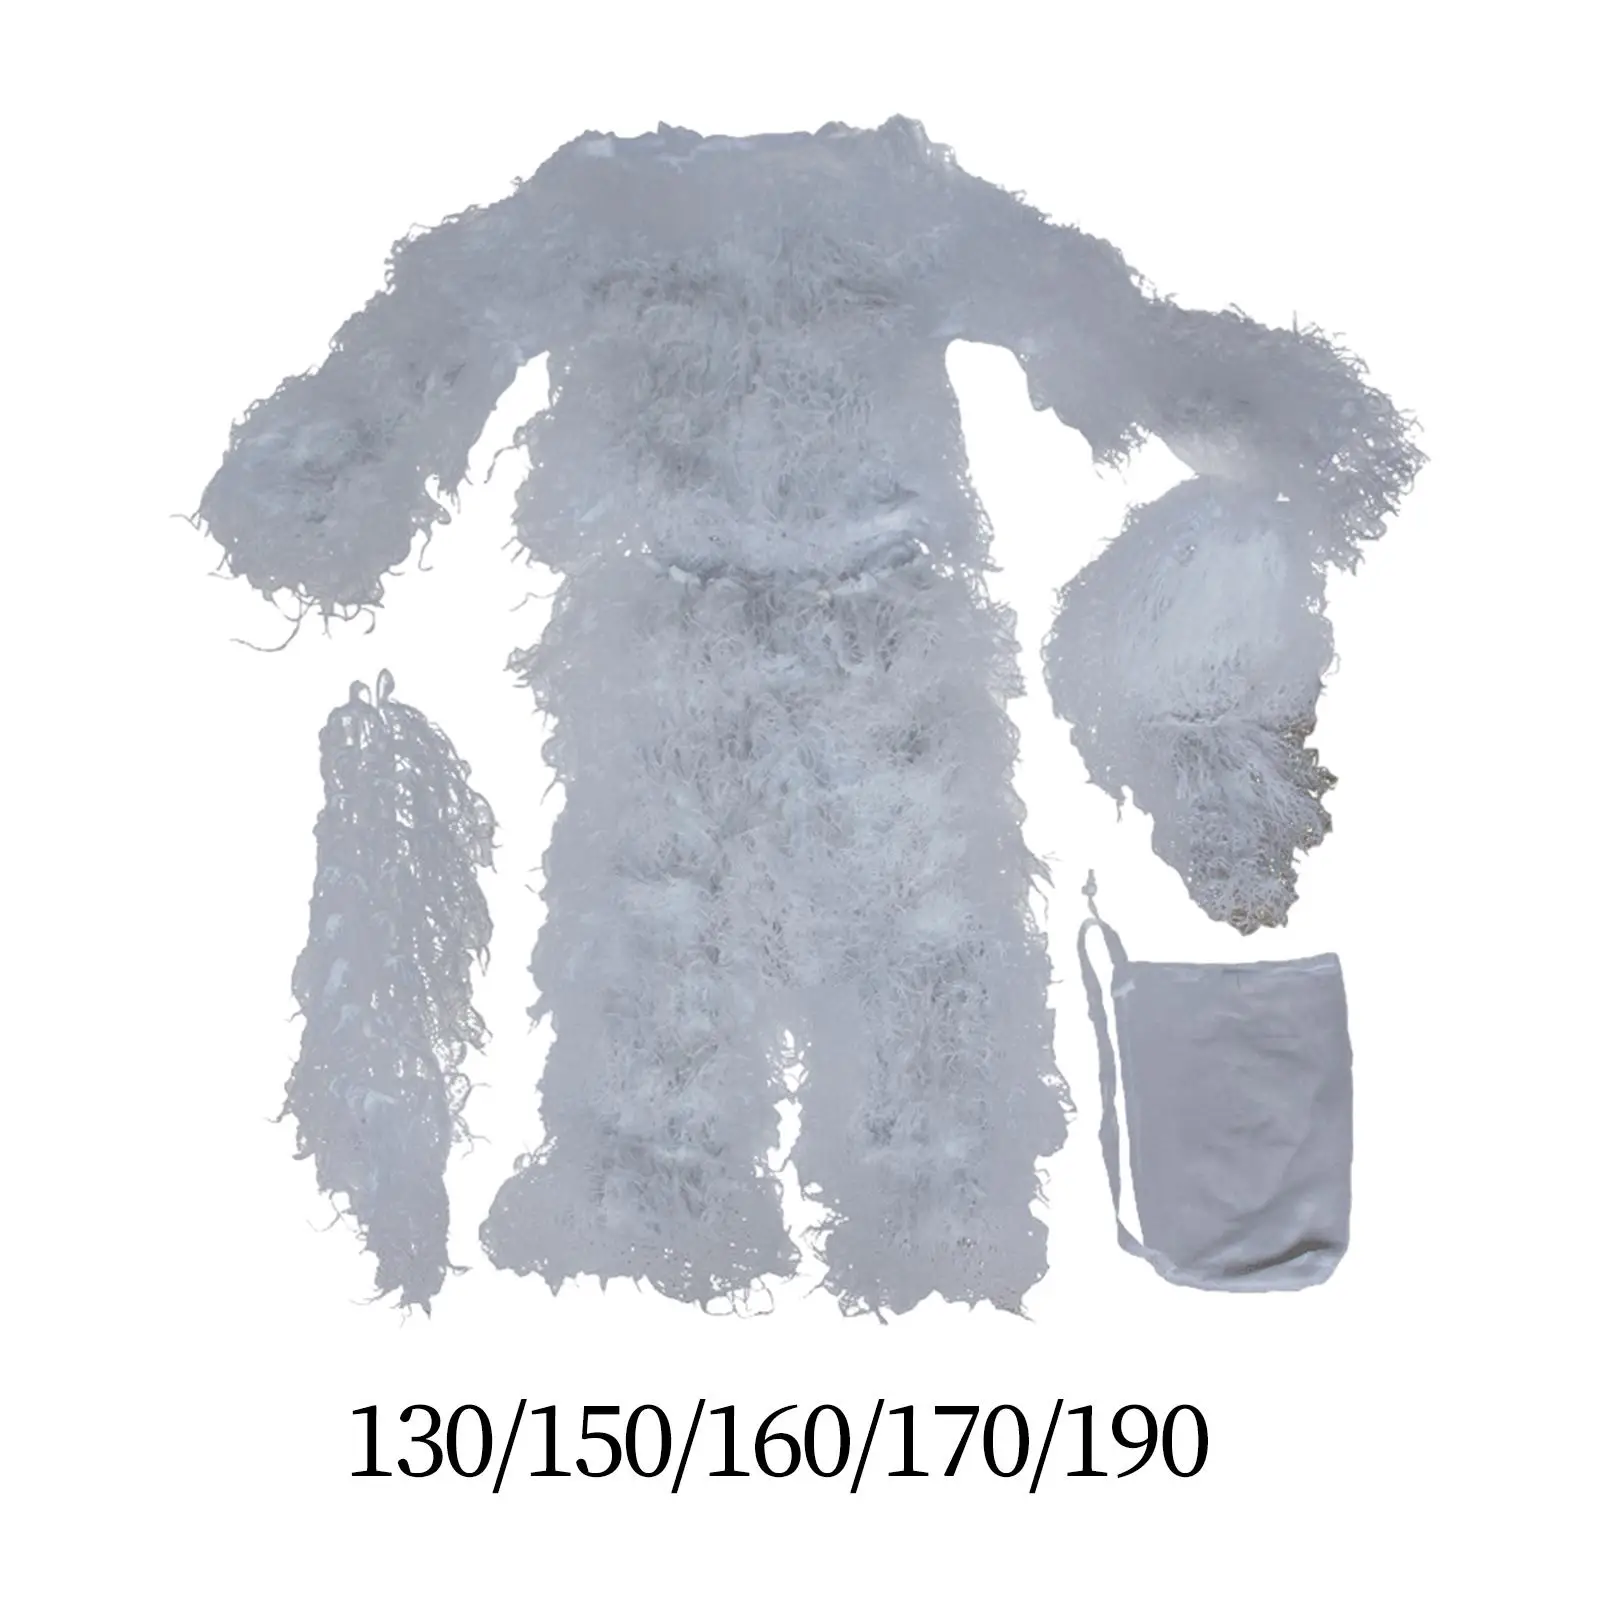 Ghillie suit, hunting suits, jacket and pants, gilly suit, clothing, clothing